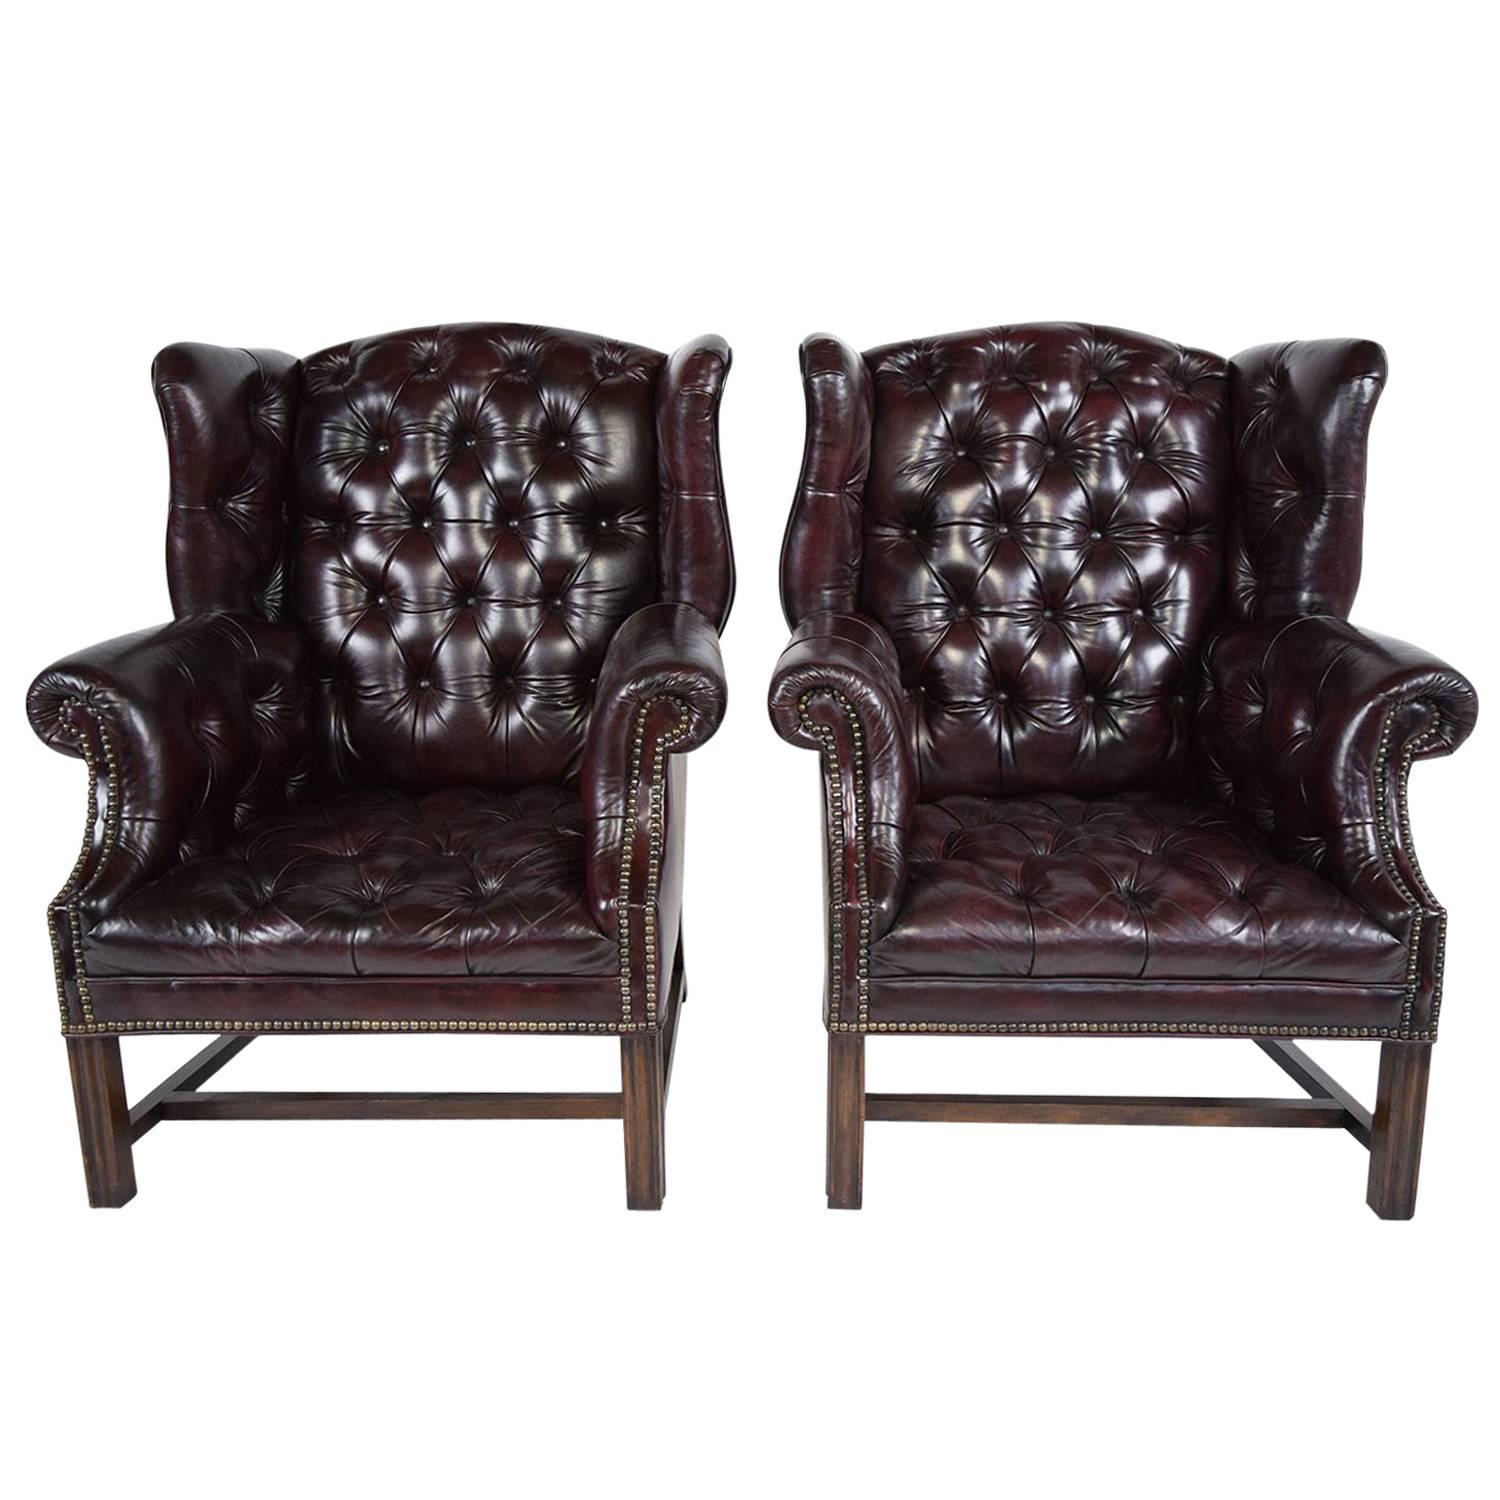 Pair of Chesterfield Tufted Leather Wingback Chairs